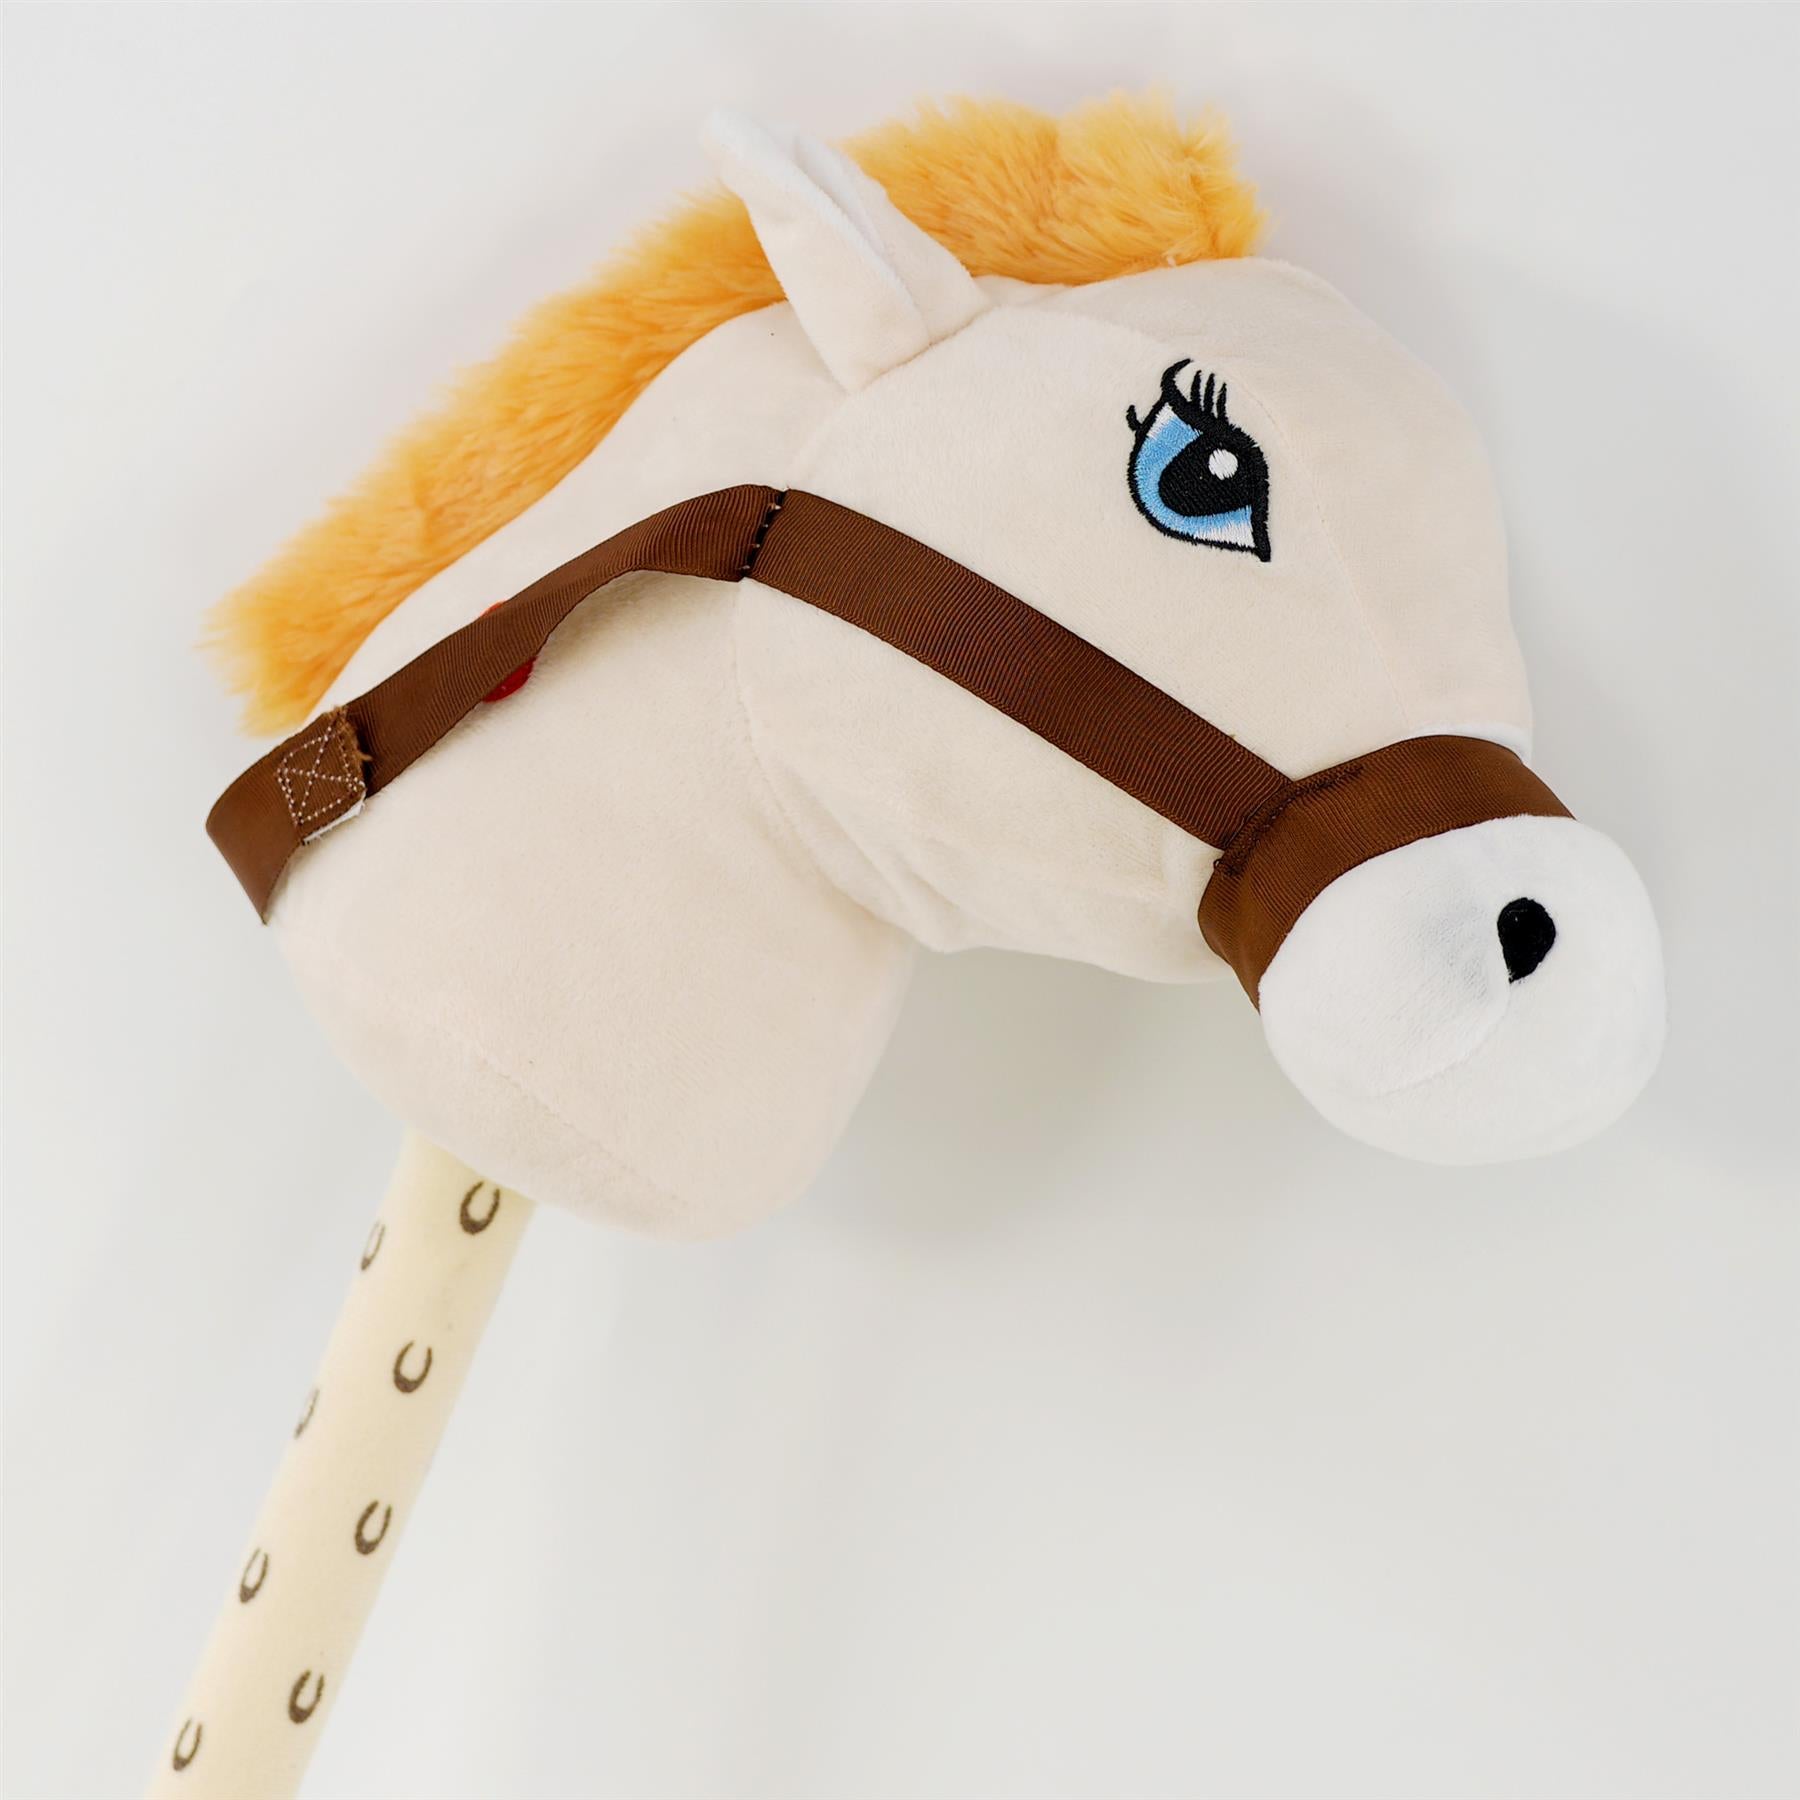 Cream Hobby Horse by The Magic Toy Shop - The Magic Toy Shop